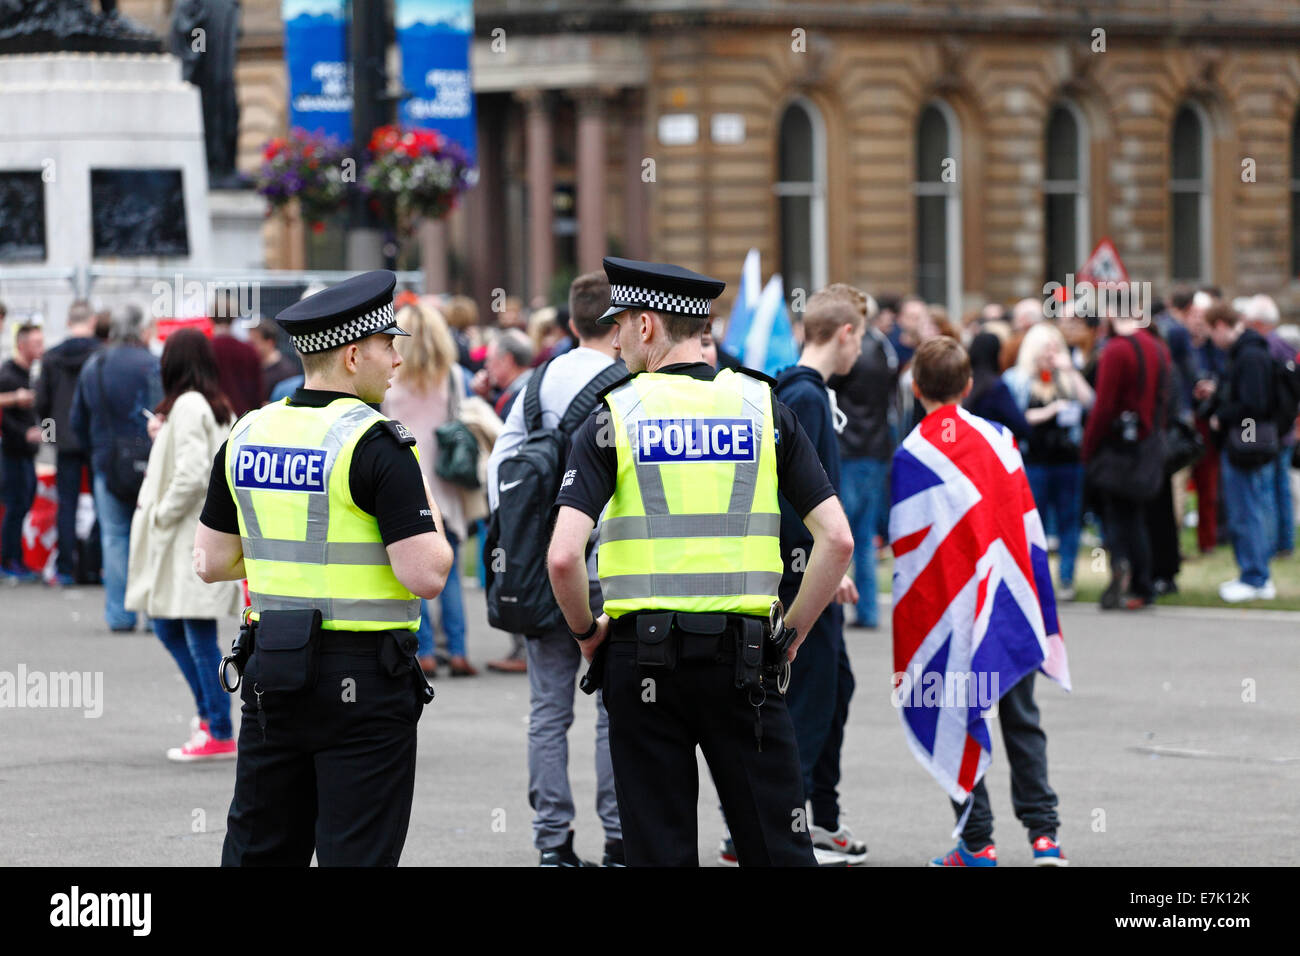 George Square, Glasgow, Scotland, UK, Friday, 19th September, 2014. On the day after Scotland Voted No in the Independence Referendum, Police Officers observe people gathering on George Square in Glasgow city centre. Stock Photo